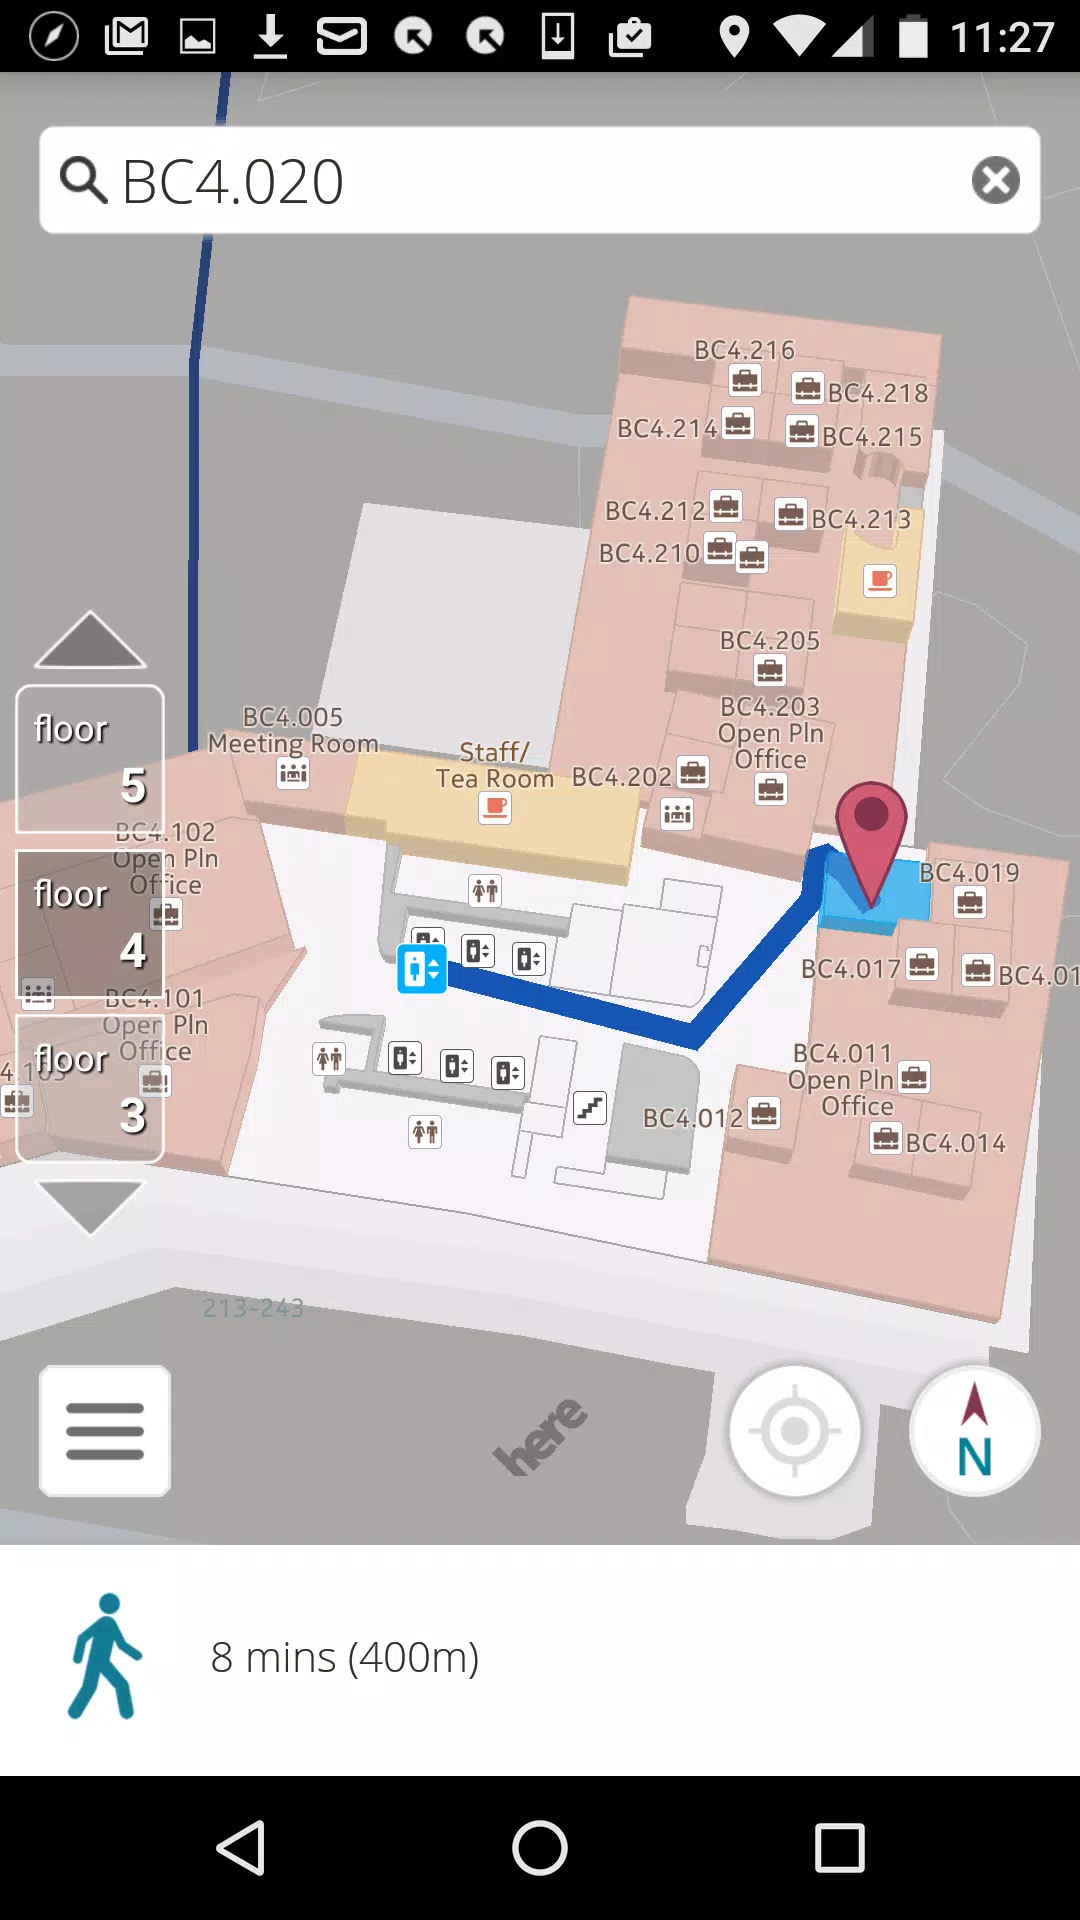 Campus Compass for Android - Download